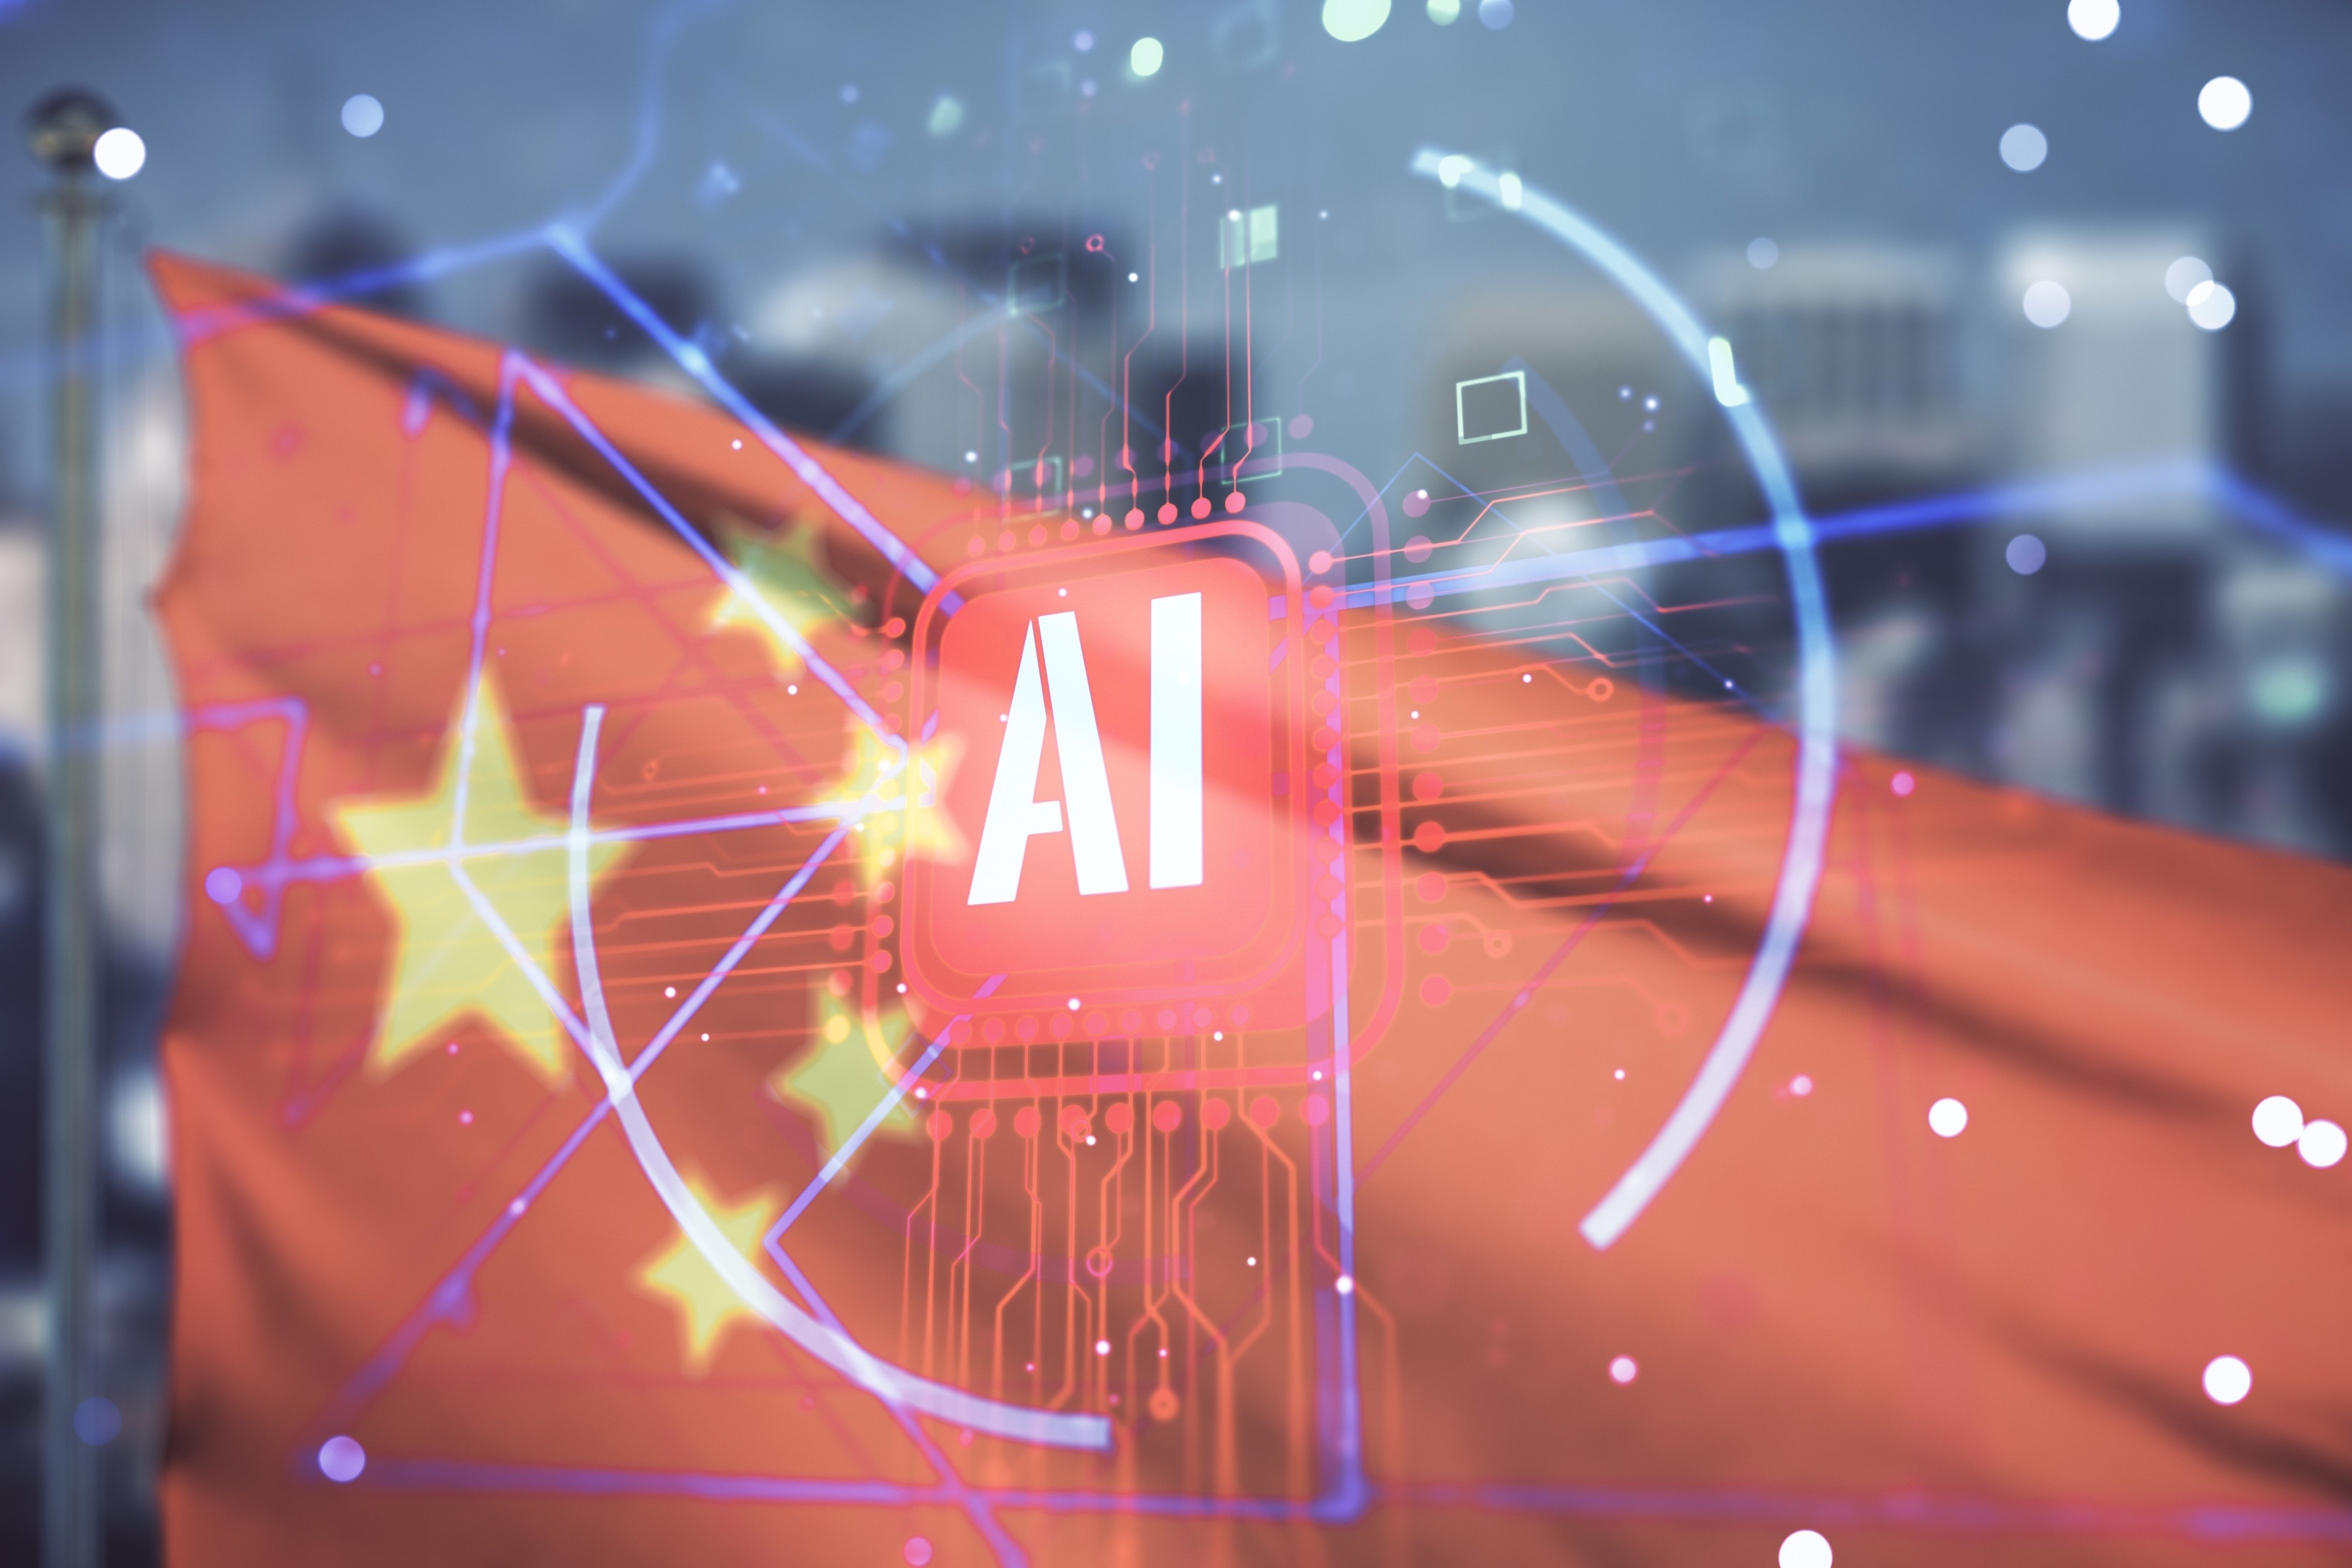 If history is any guide, Chinese AI companies are likely to find creative ways to produce output in line with the Communist Party’s stance. Photo: Shutterstock